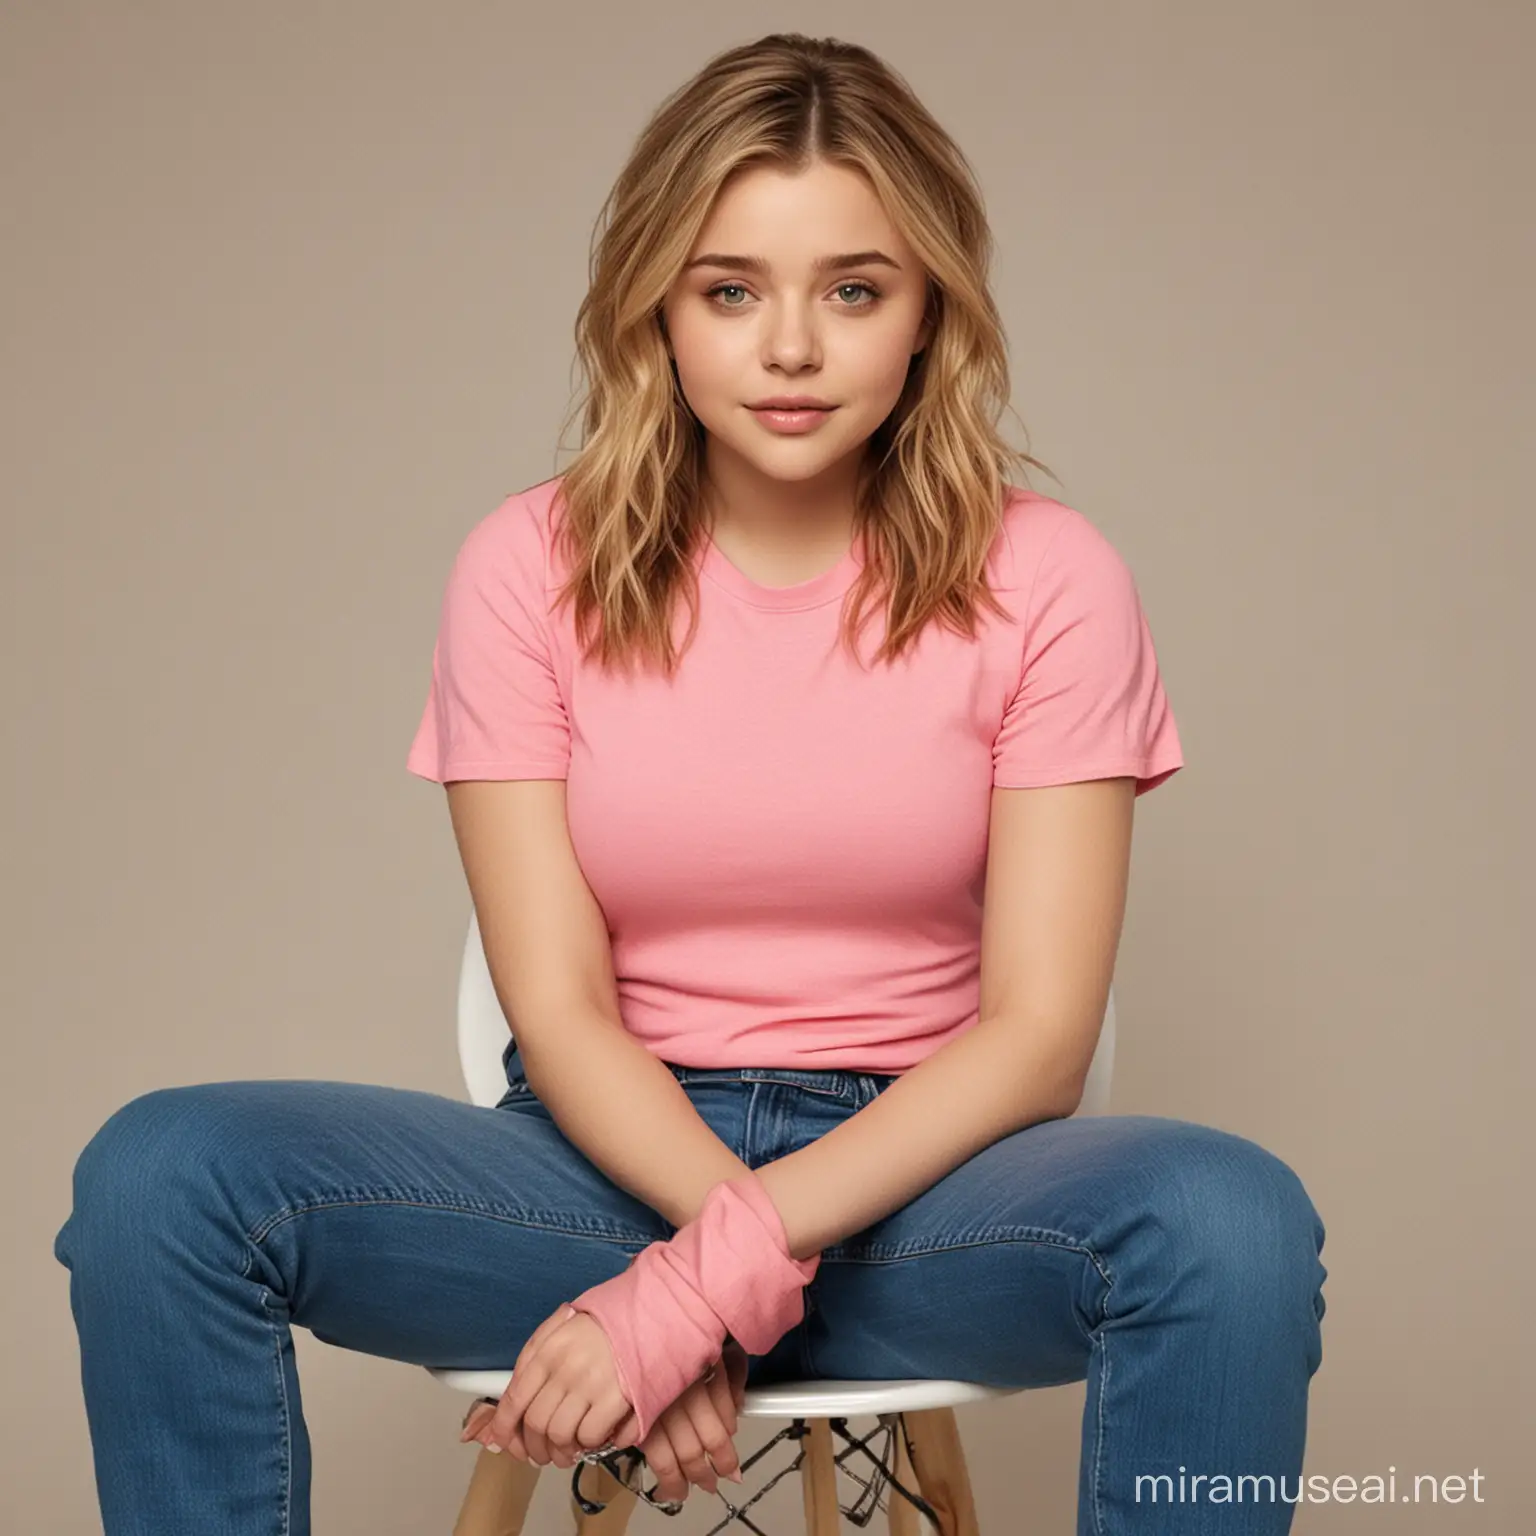 Chloë Grace Moretz hot in pink top and blue jeans sitting on chair